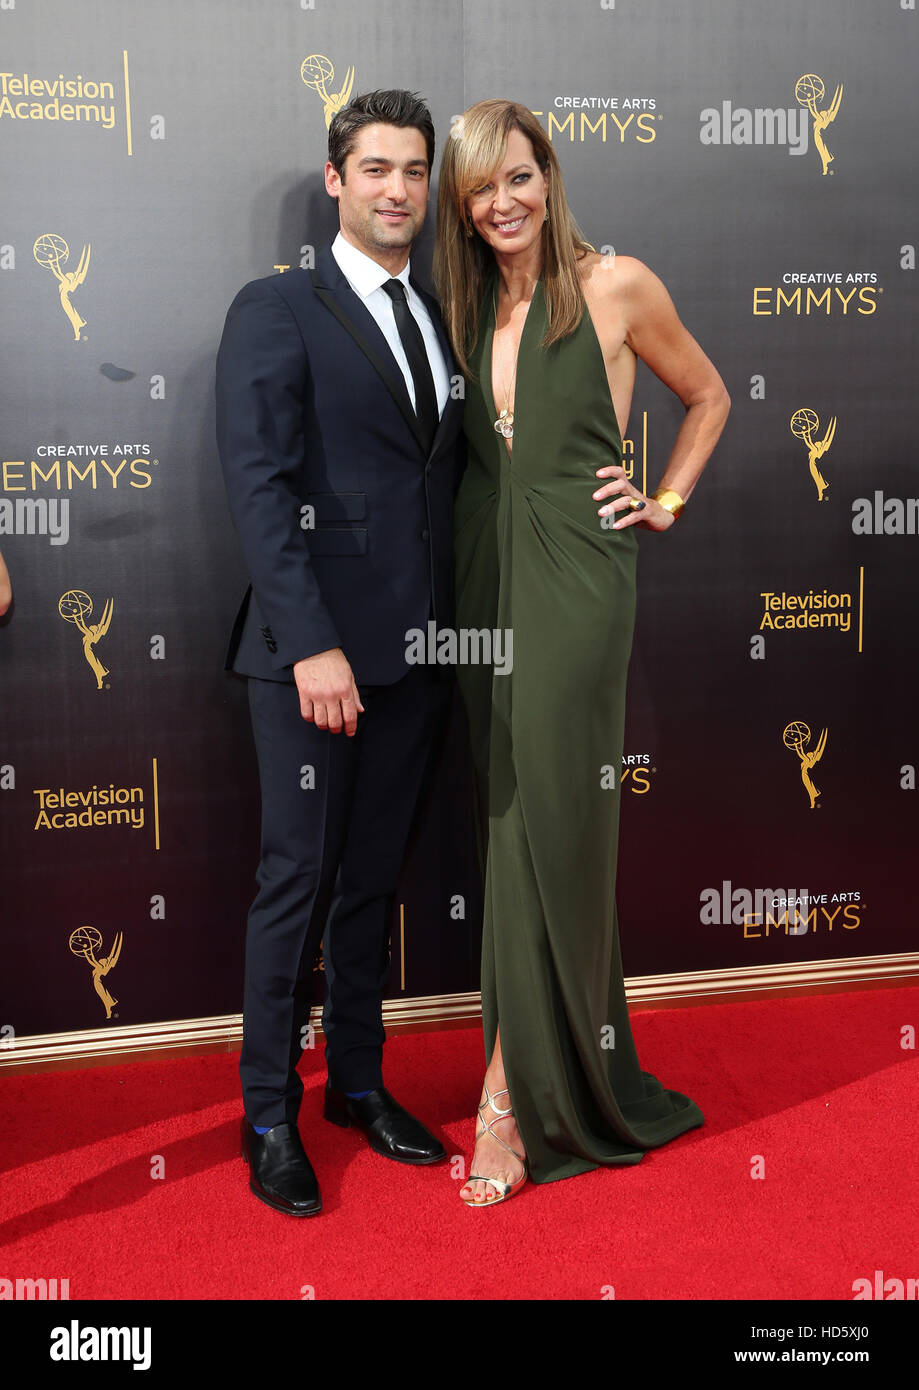 2016 Creative Arts Emmy Awards - Day 1  Featuring: Philip Joncas, Allison Janney Where: Los Angeles, California, United States When: 10 Sep 2016 Stock Photo